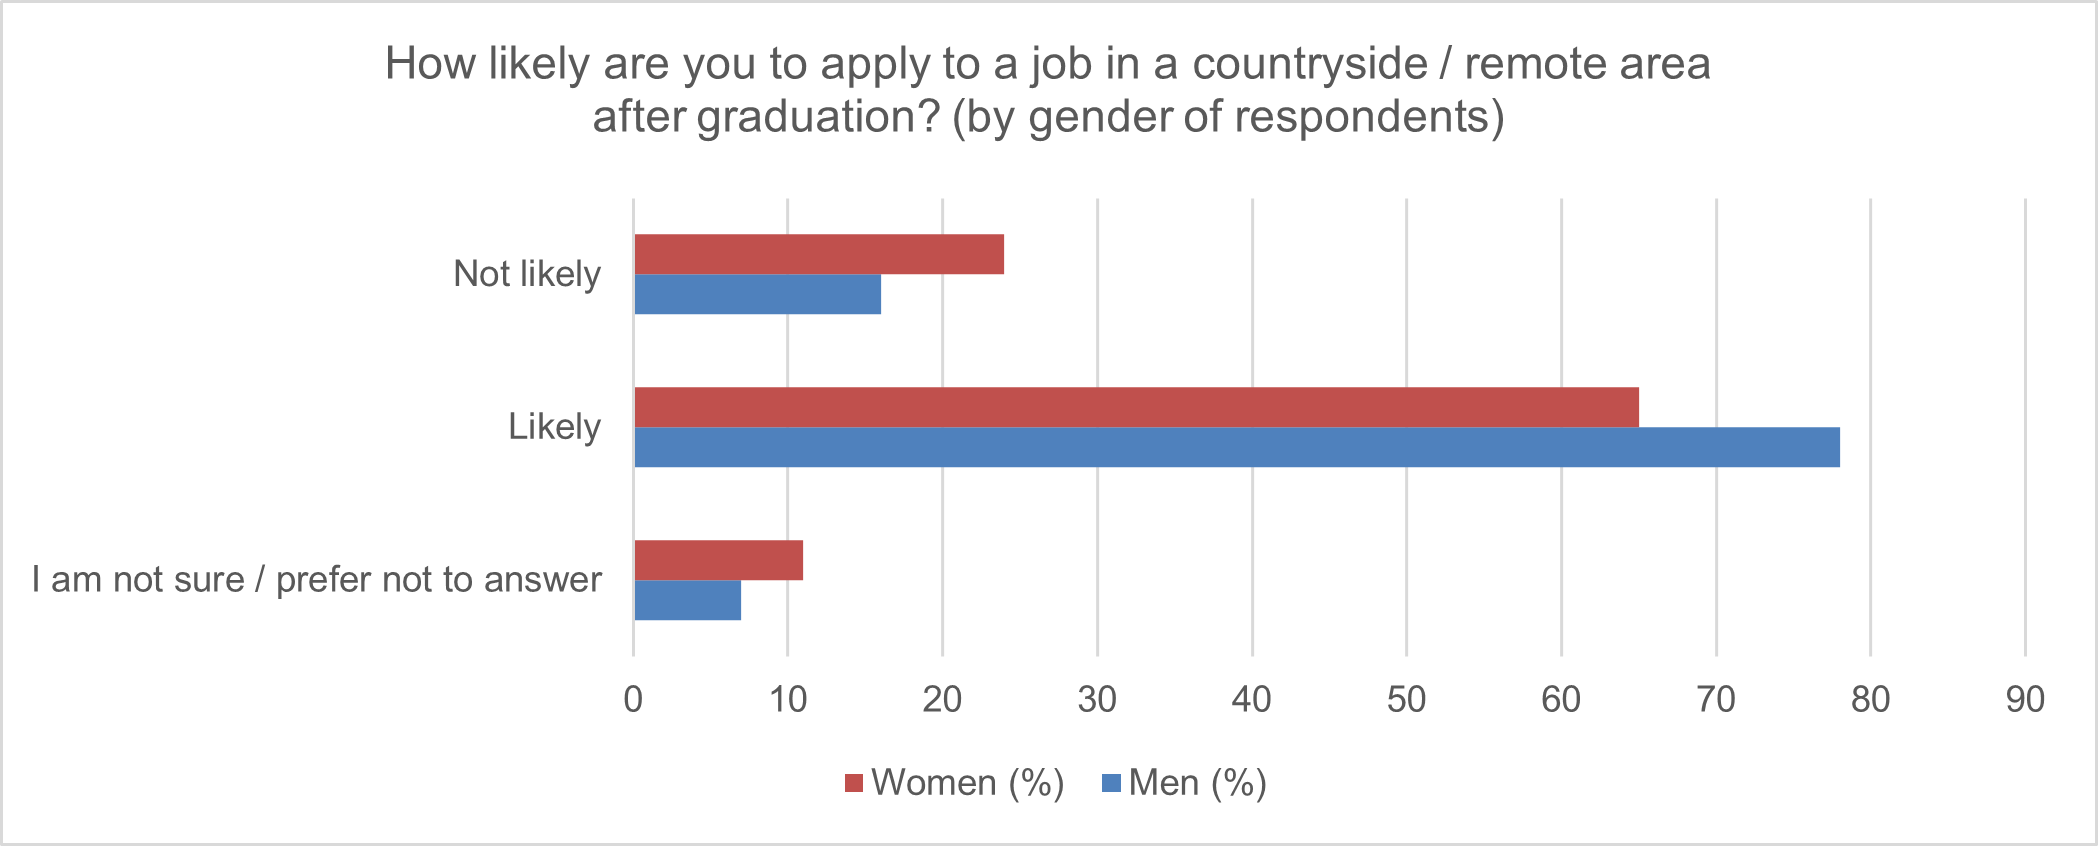 Students’ perceptions of the likelihood of applying for a job in a remote area